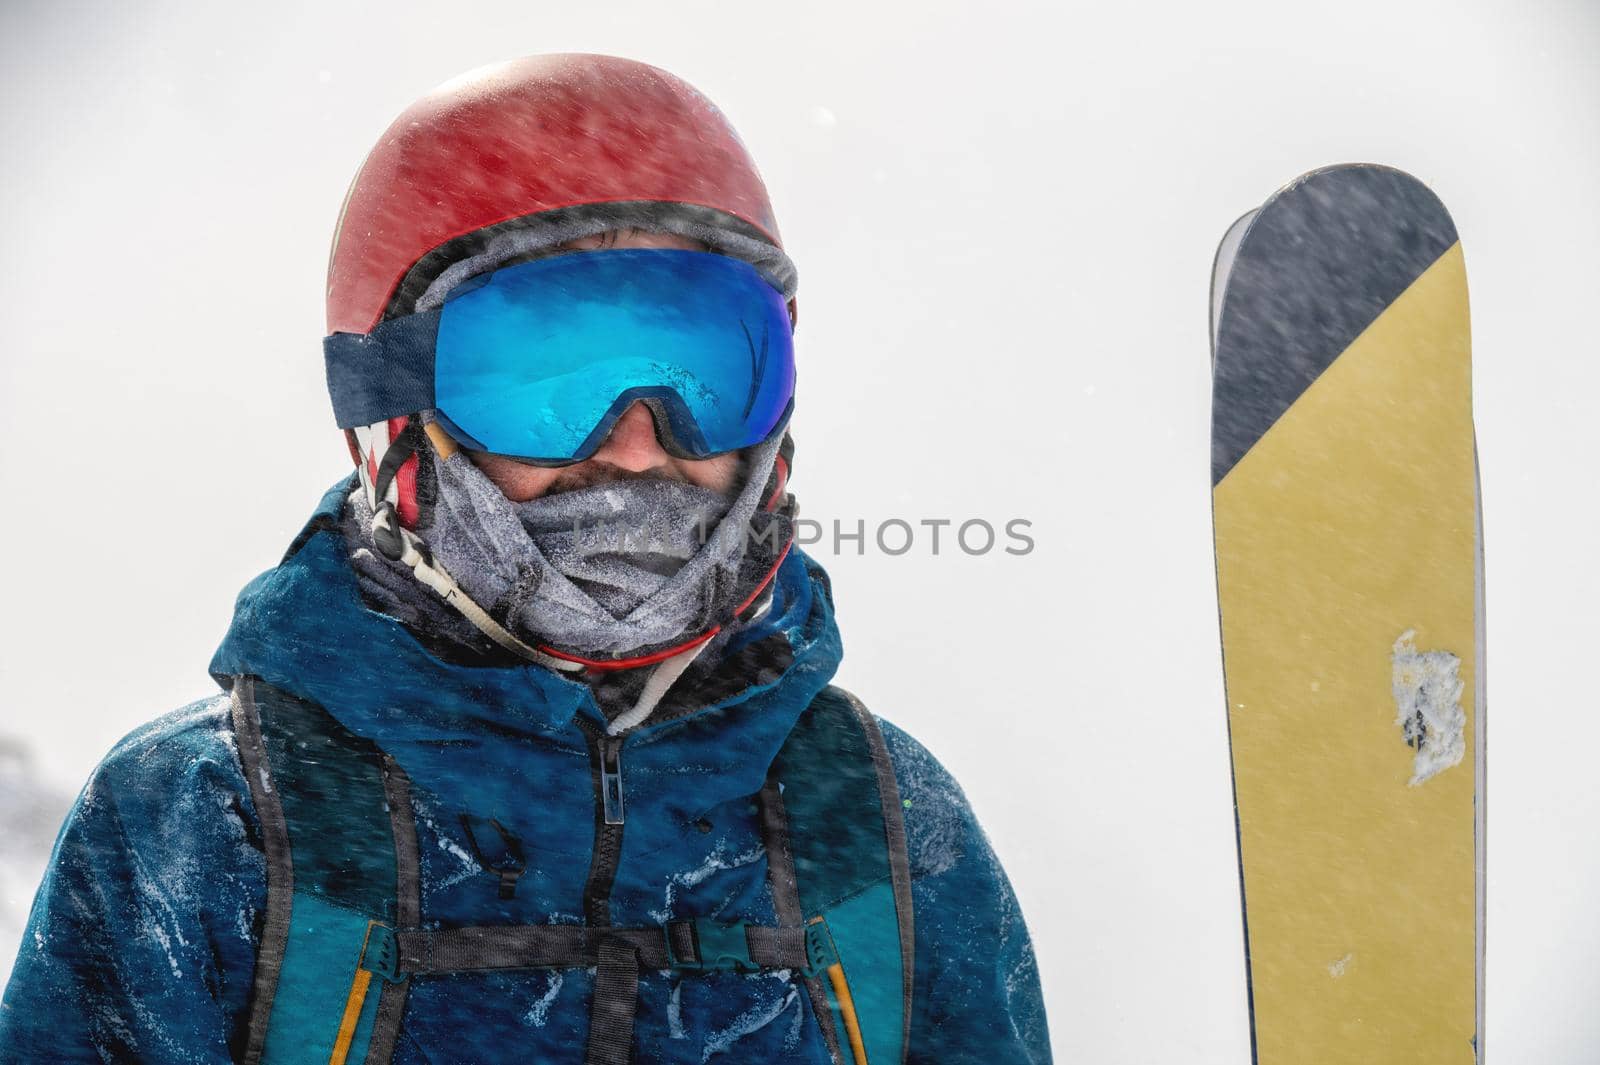 Closeup portrait of ski goggles of a man with reflection of snowy mountains. The mountain range is reflected in the ski mask. Portrait of a man in a ski resort against the backdrop of mountains and sky in a snow blizzard.